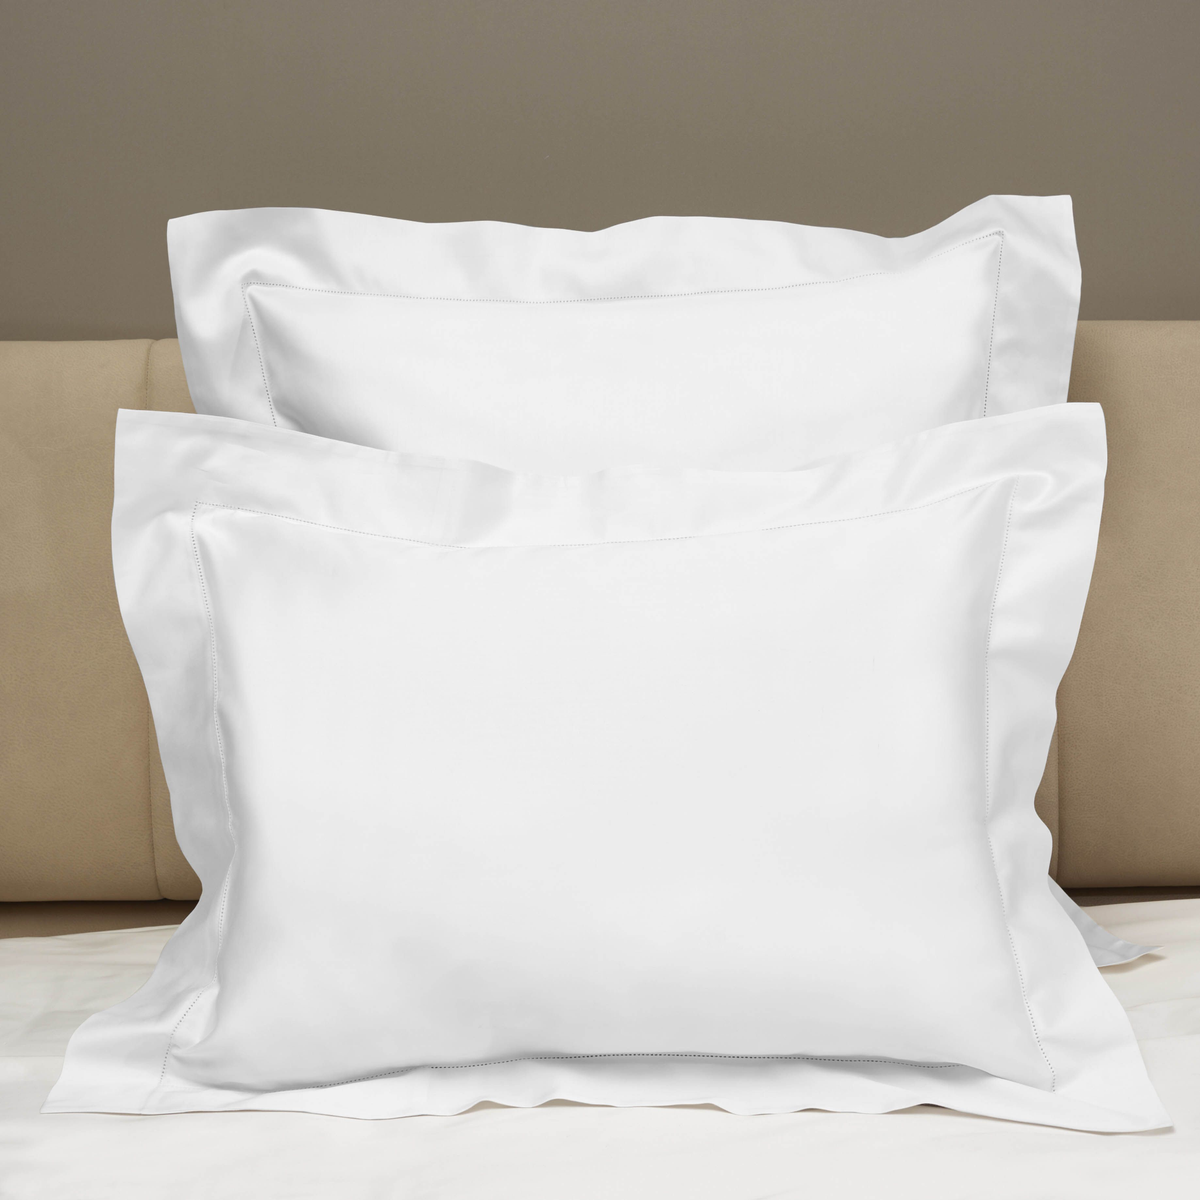 Front View of Signoria Nuvola Bedding Shams in White Color